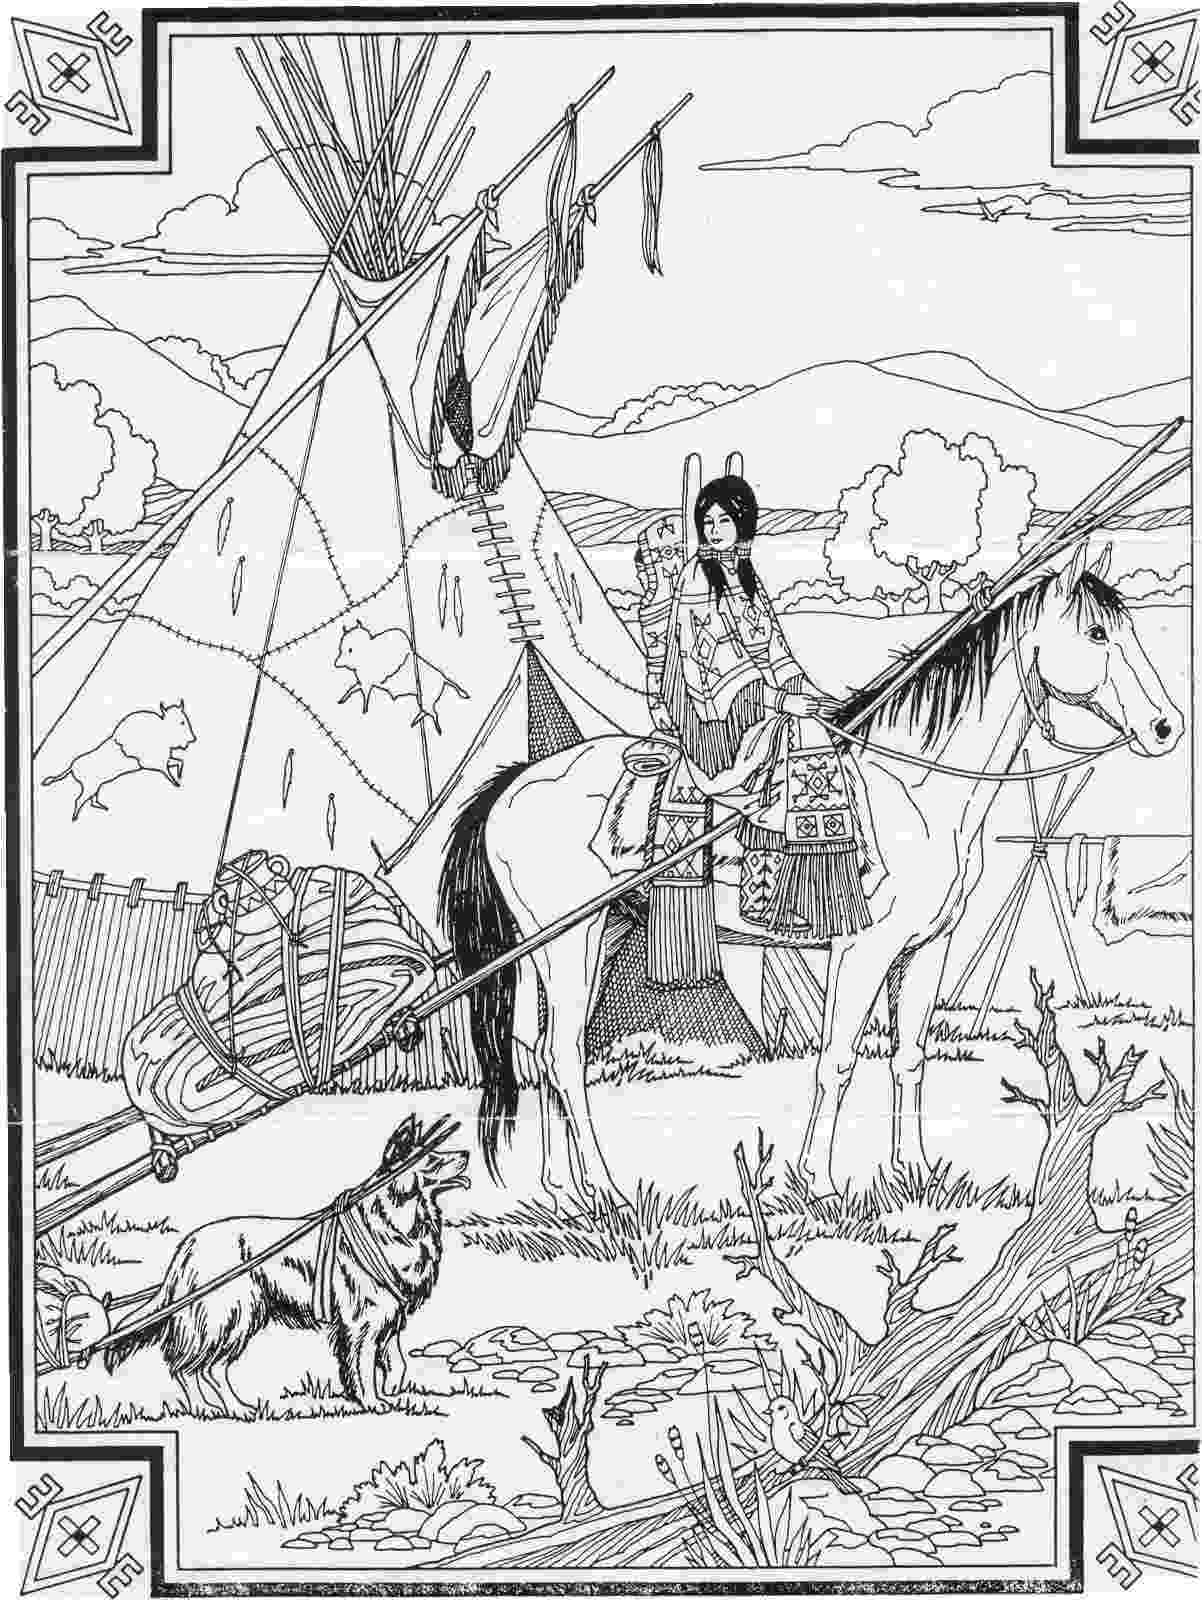 free native american coloring pages native american coloring pages best coloring pages for kids native free american coloring pages 